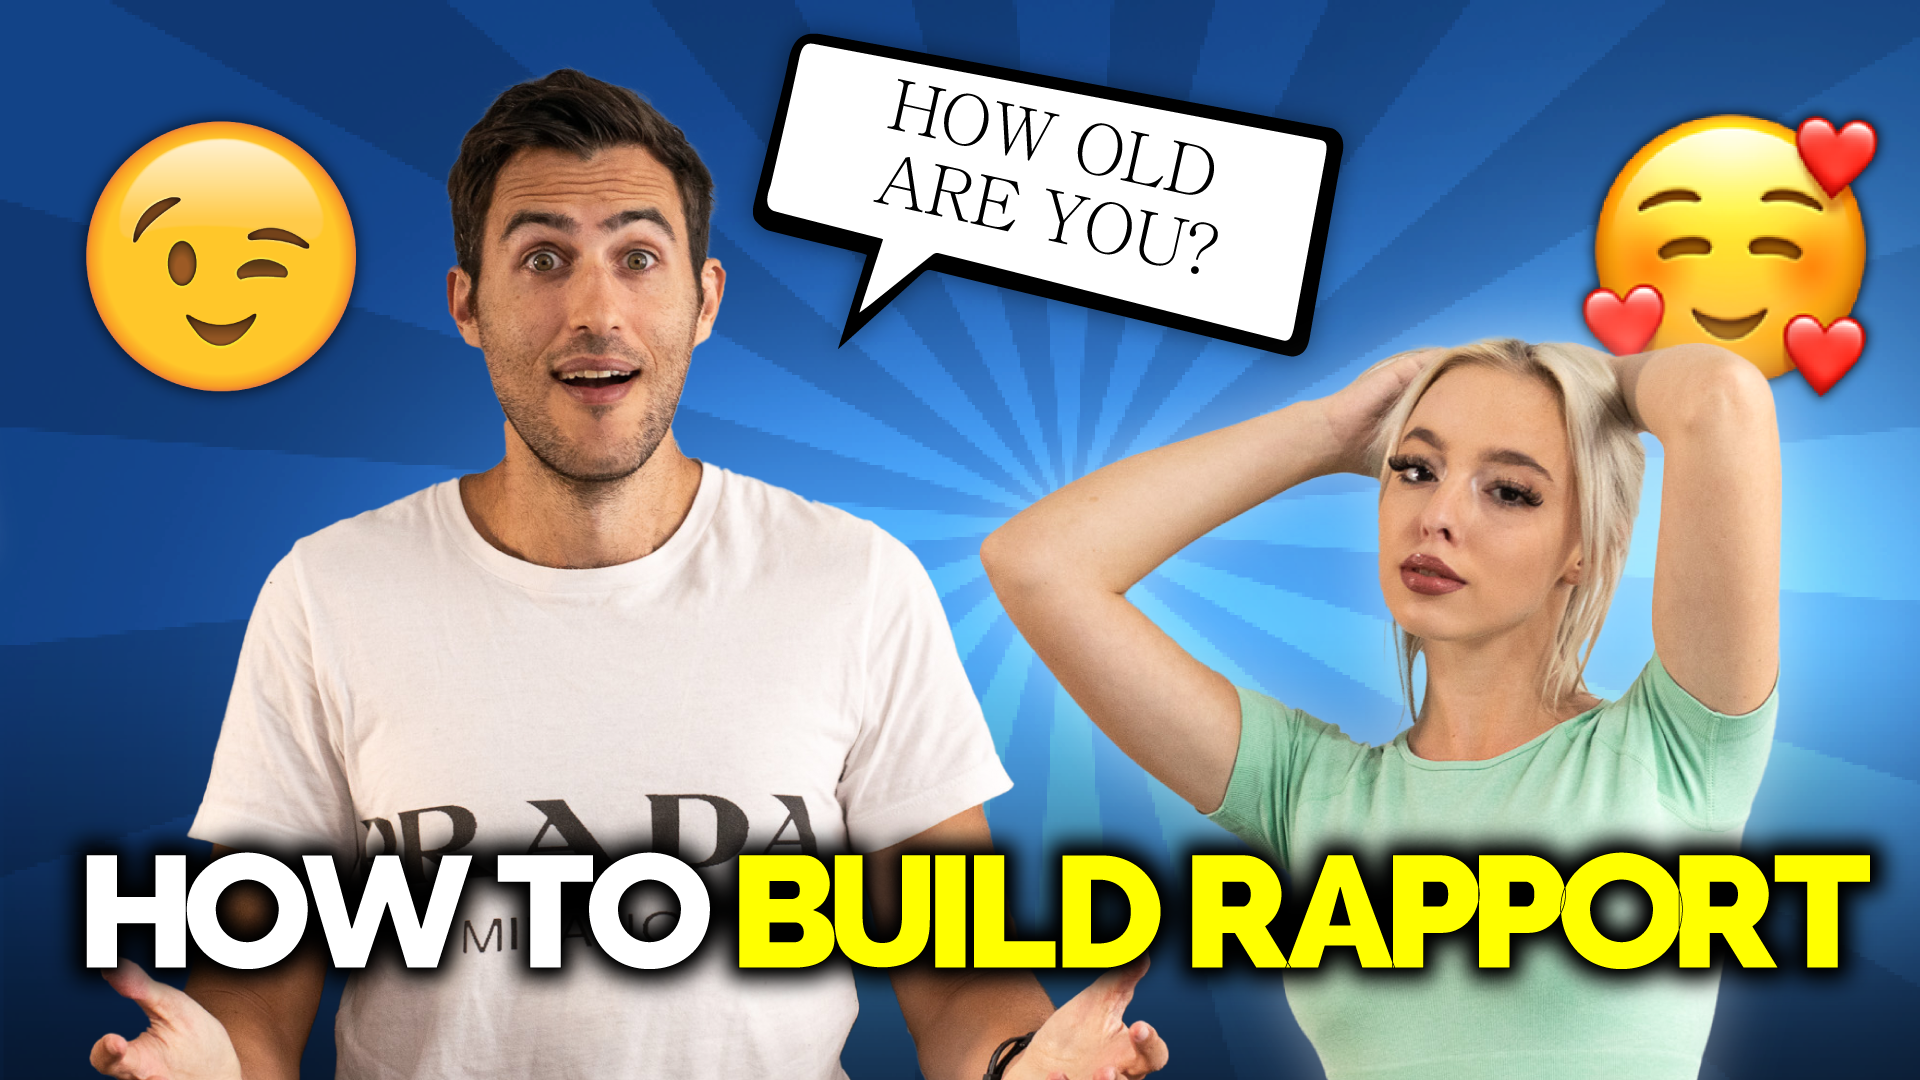 How To Build Rapport With Women Using Tonality (DEMONSTRATION)